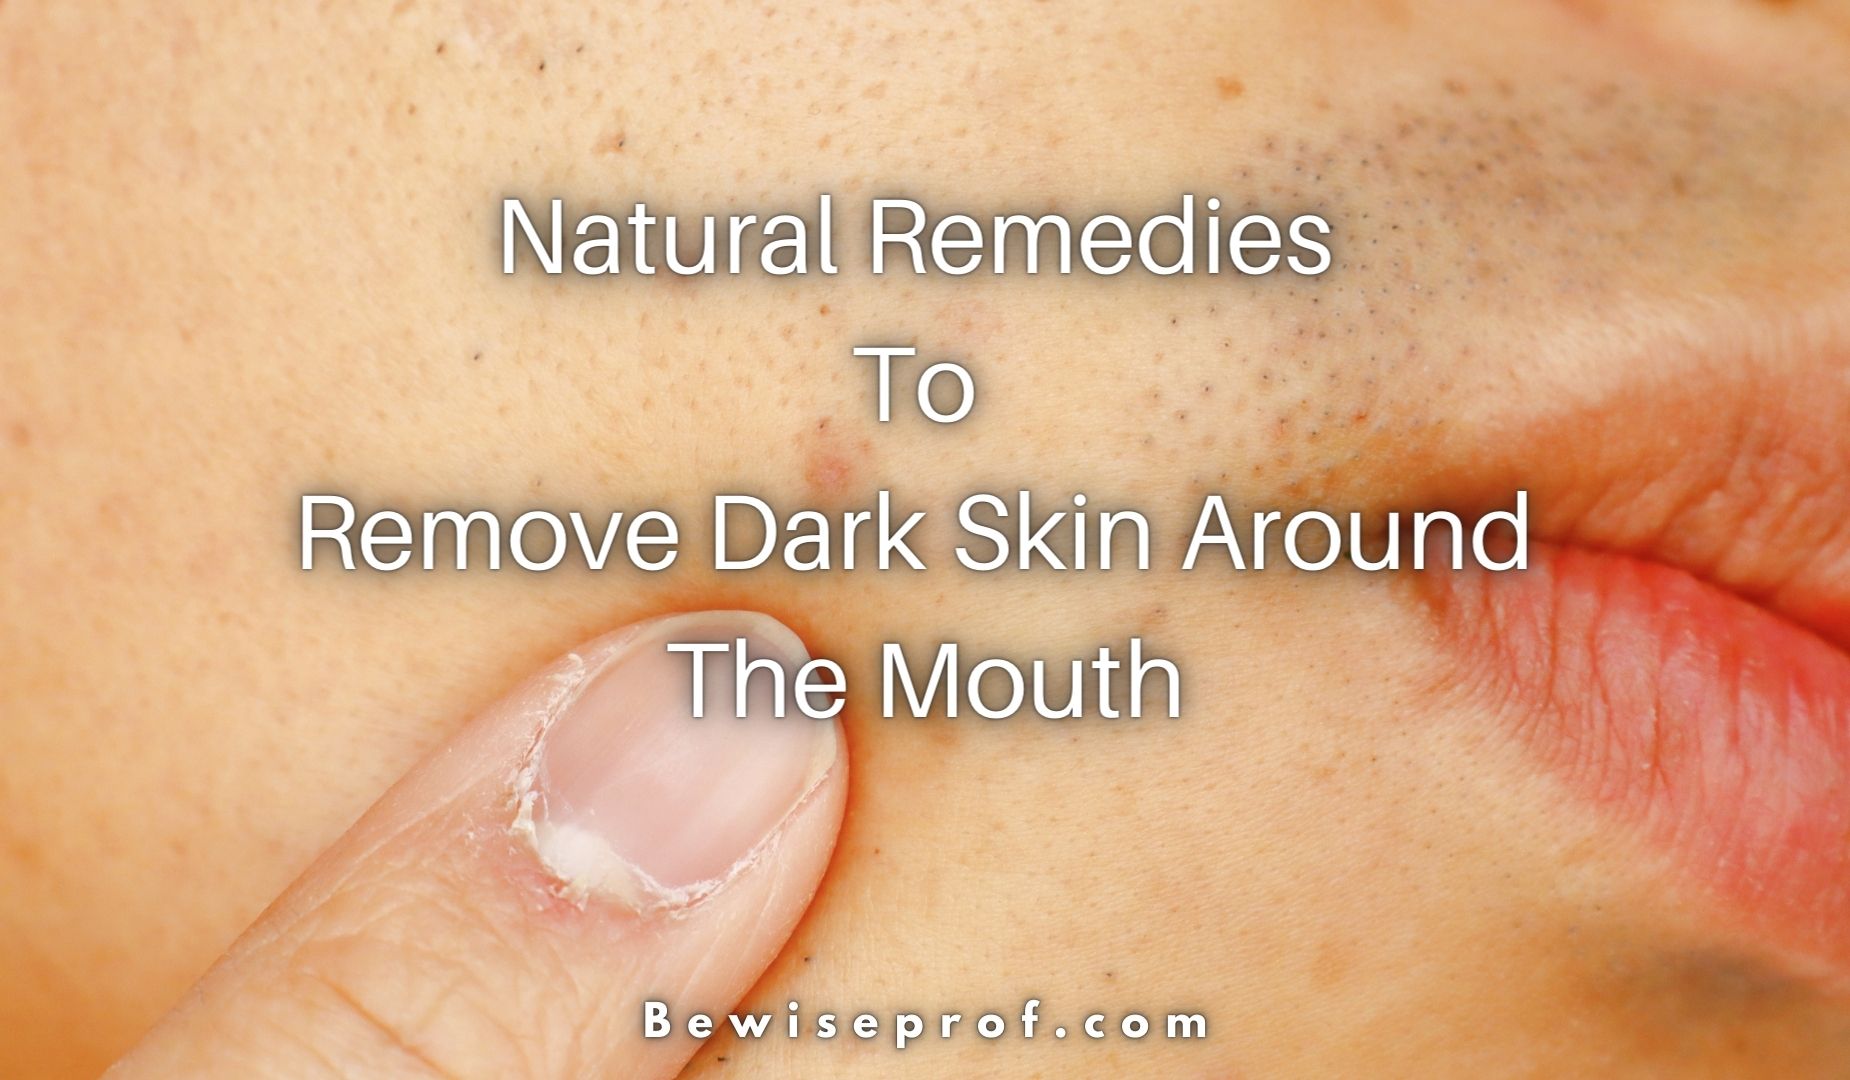 Natural Remedies To Remove Dark Skin Around The Mouth